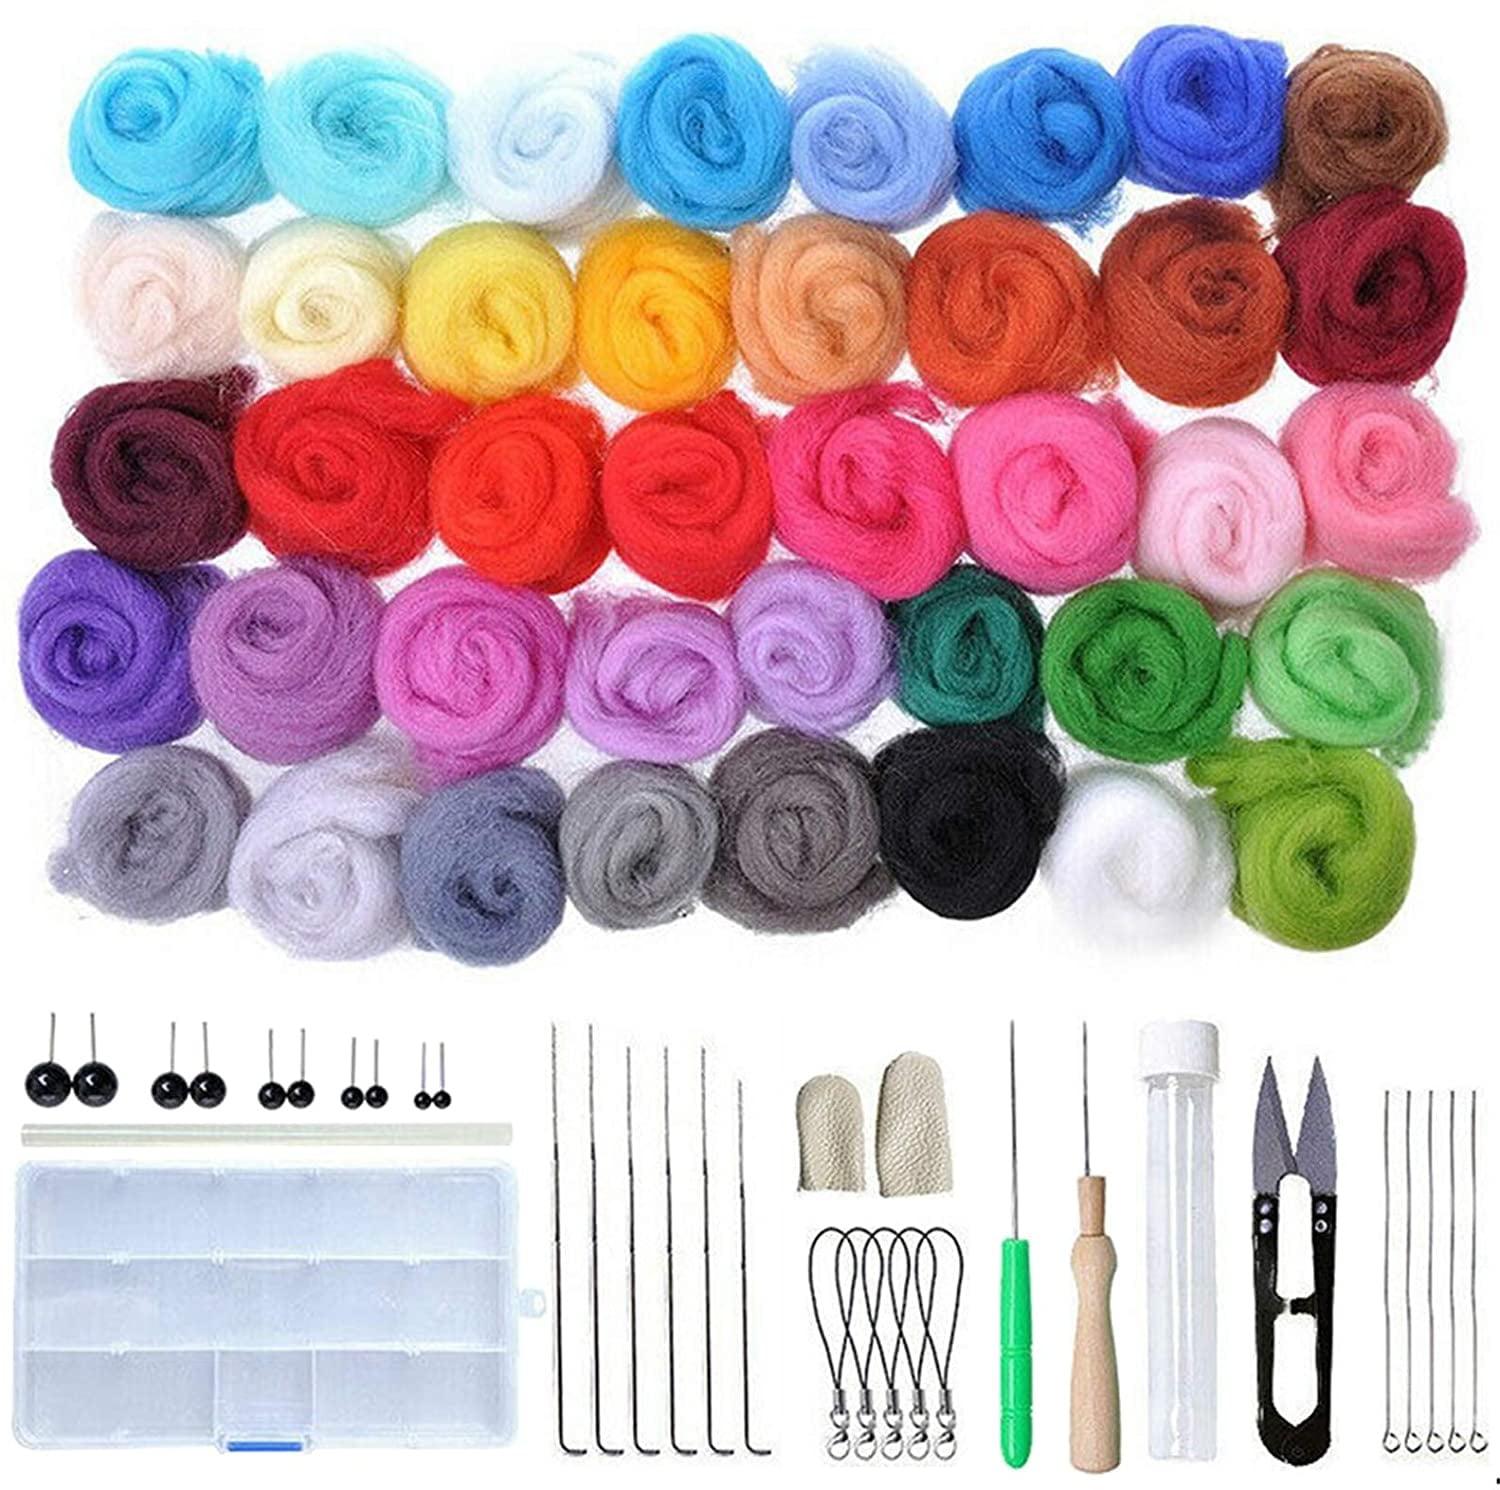 Needle Felting Kit,Wool Roving 40 Colors Set,Needle Felting Starter Kit,Wool  Felt Tools with Felting Tool Instruction Included for Felted Animal Needle  Felting Supplies DIY Crafts 